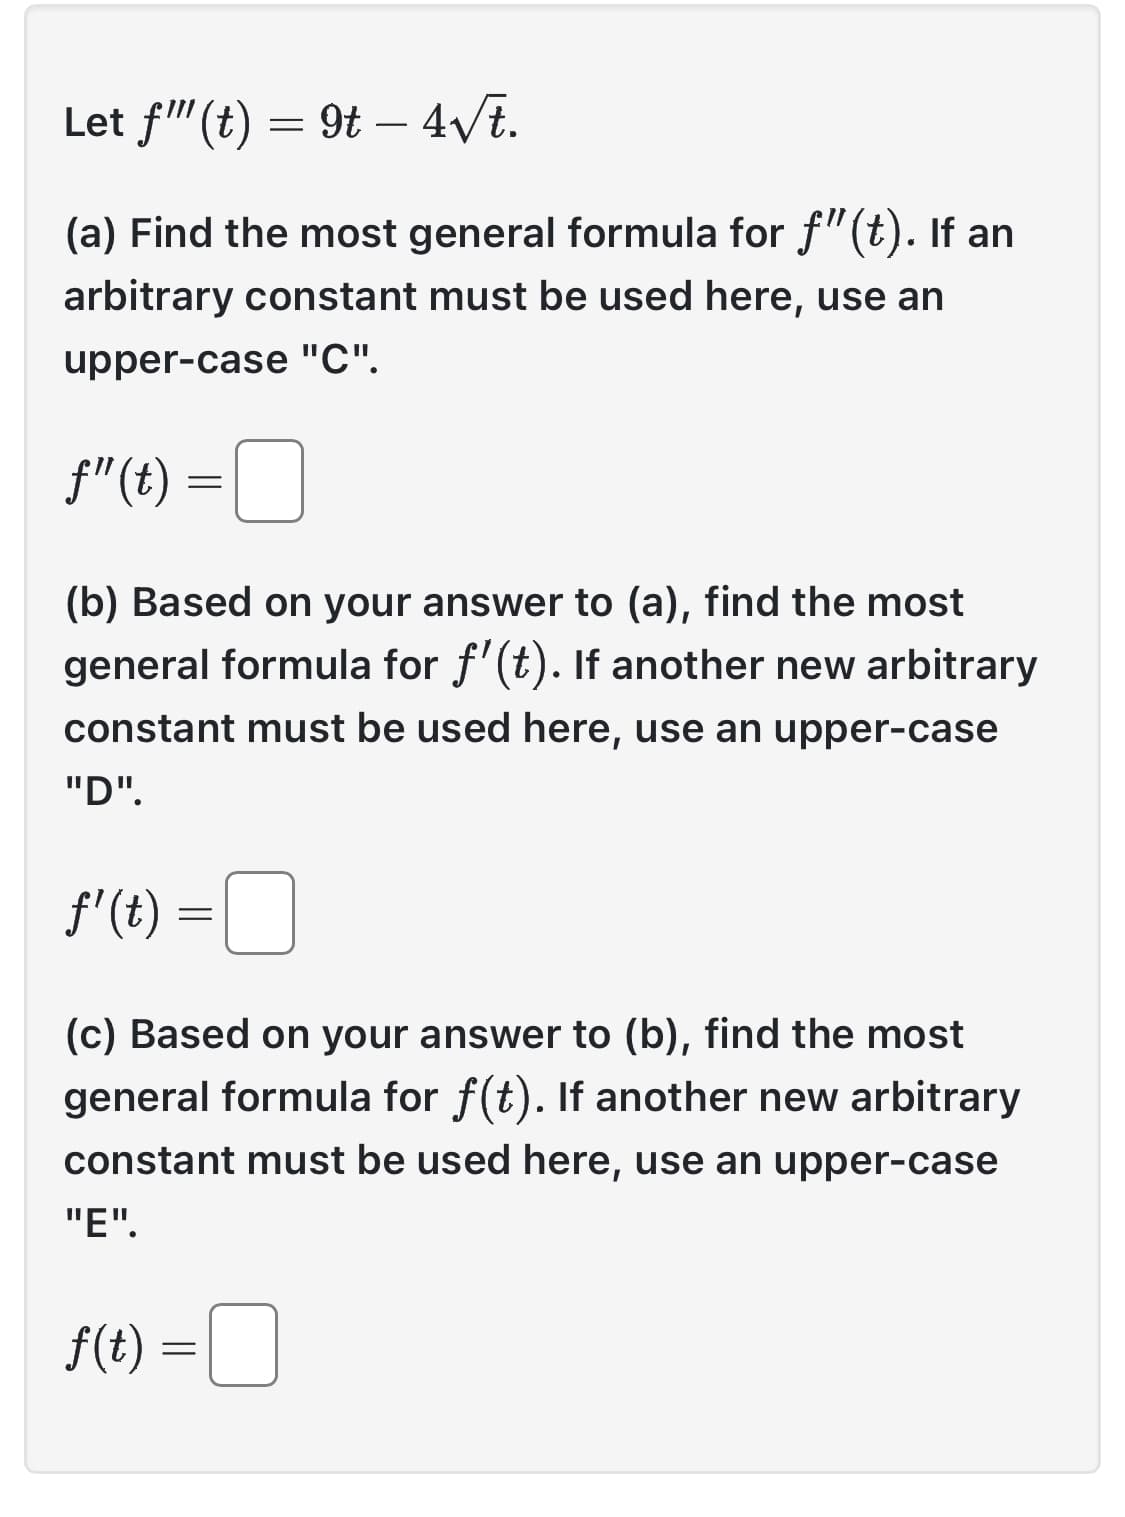 Let f"(t) = 9t - 4√t.
(a) Find the most general formula for f"(t). If an
arbitrary constant must be used here, use an
upper-case "C".
f"(t)
(b) Based on your answer to (a), find the most
general formula for f'(t). If another new arbitrary
constant must be used here, use an upper-case
"D".
f'(t) =
=
=
(c) Based on your answer to (b), find the most
general formula for f(t). If another new arbitrary
constant must be used here, use an upper-case
"E".
f(t) =
=